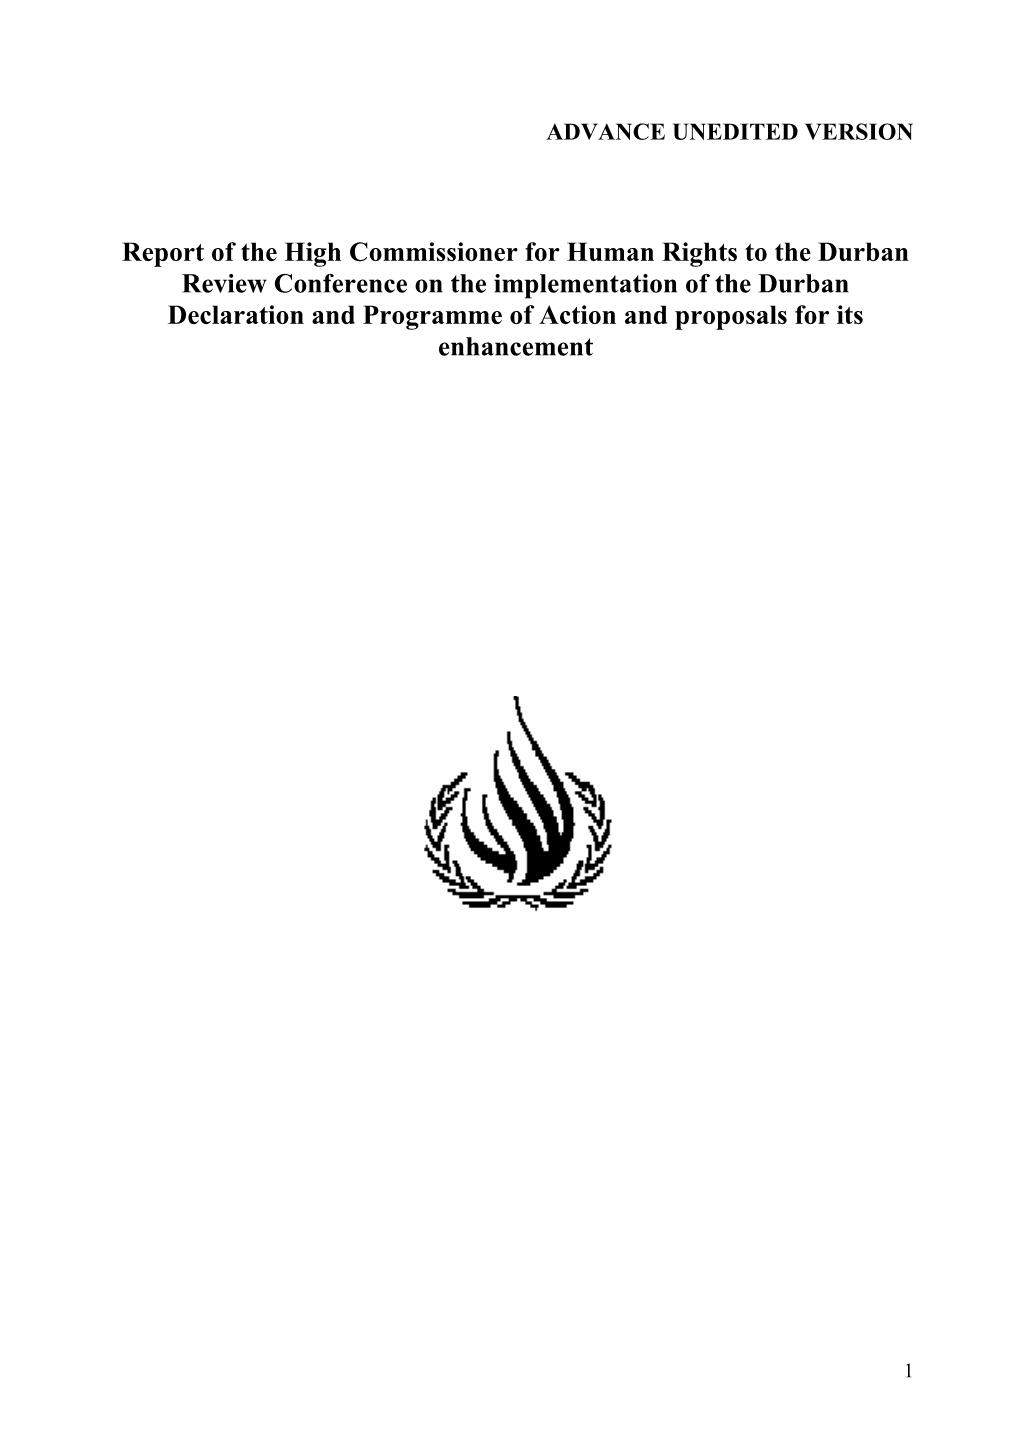 Report of the High Commissioner for Human Rights to the Durban Review Conference